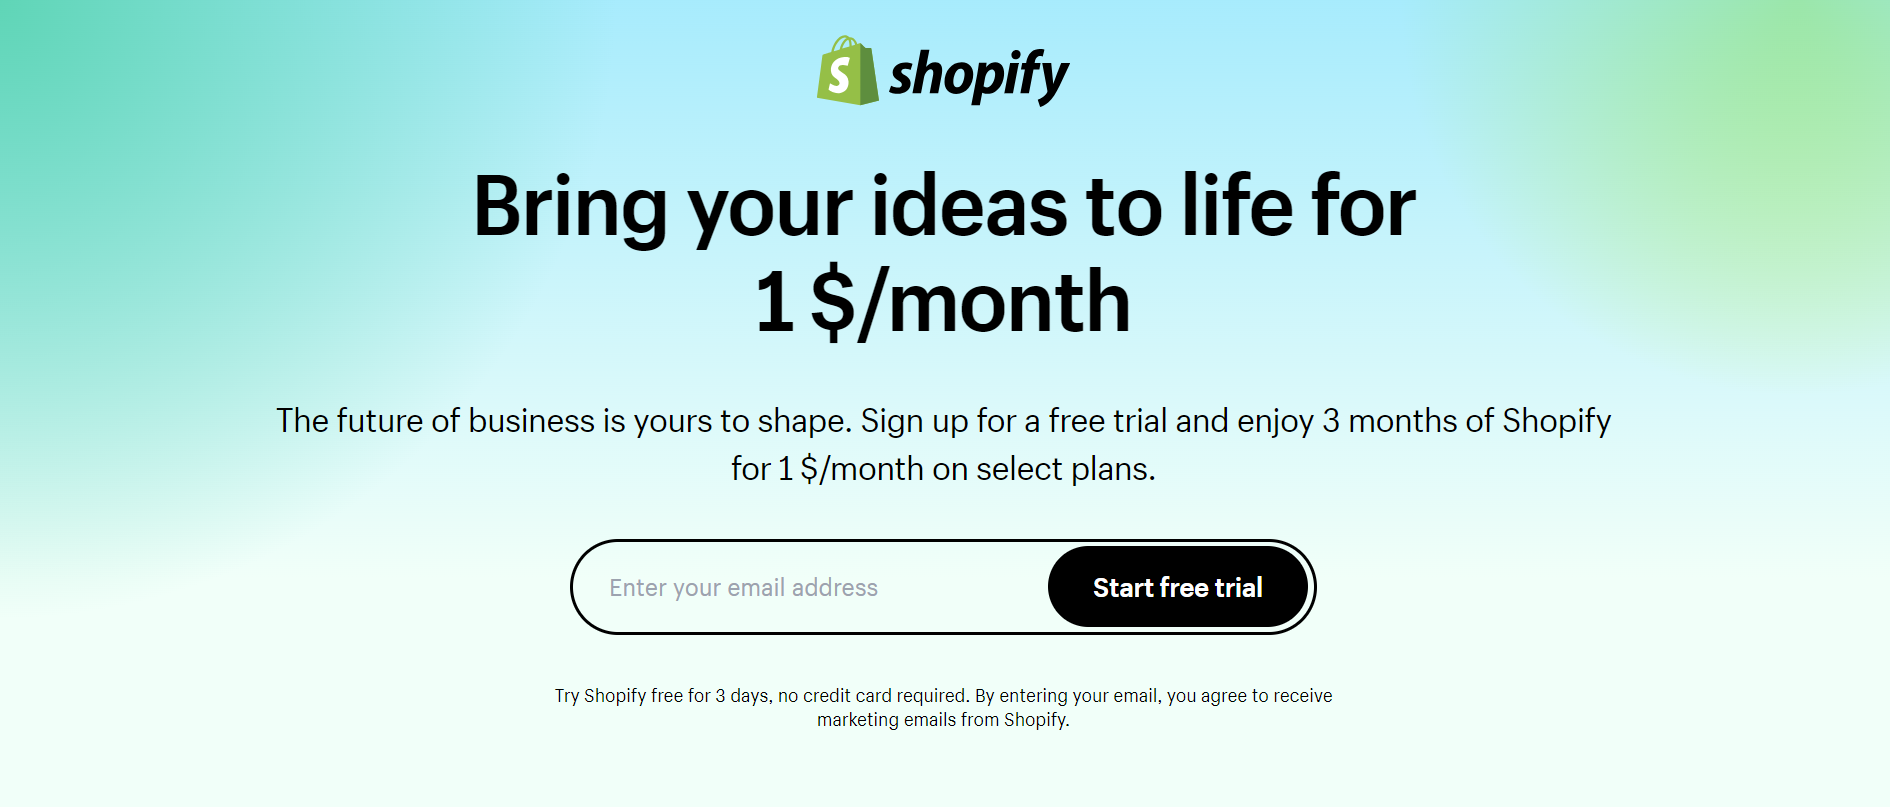 Sign up Shopify 1$ for 3 months trials